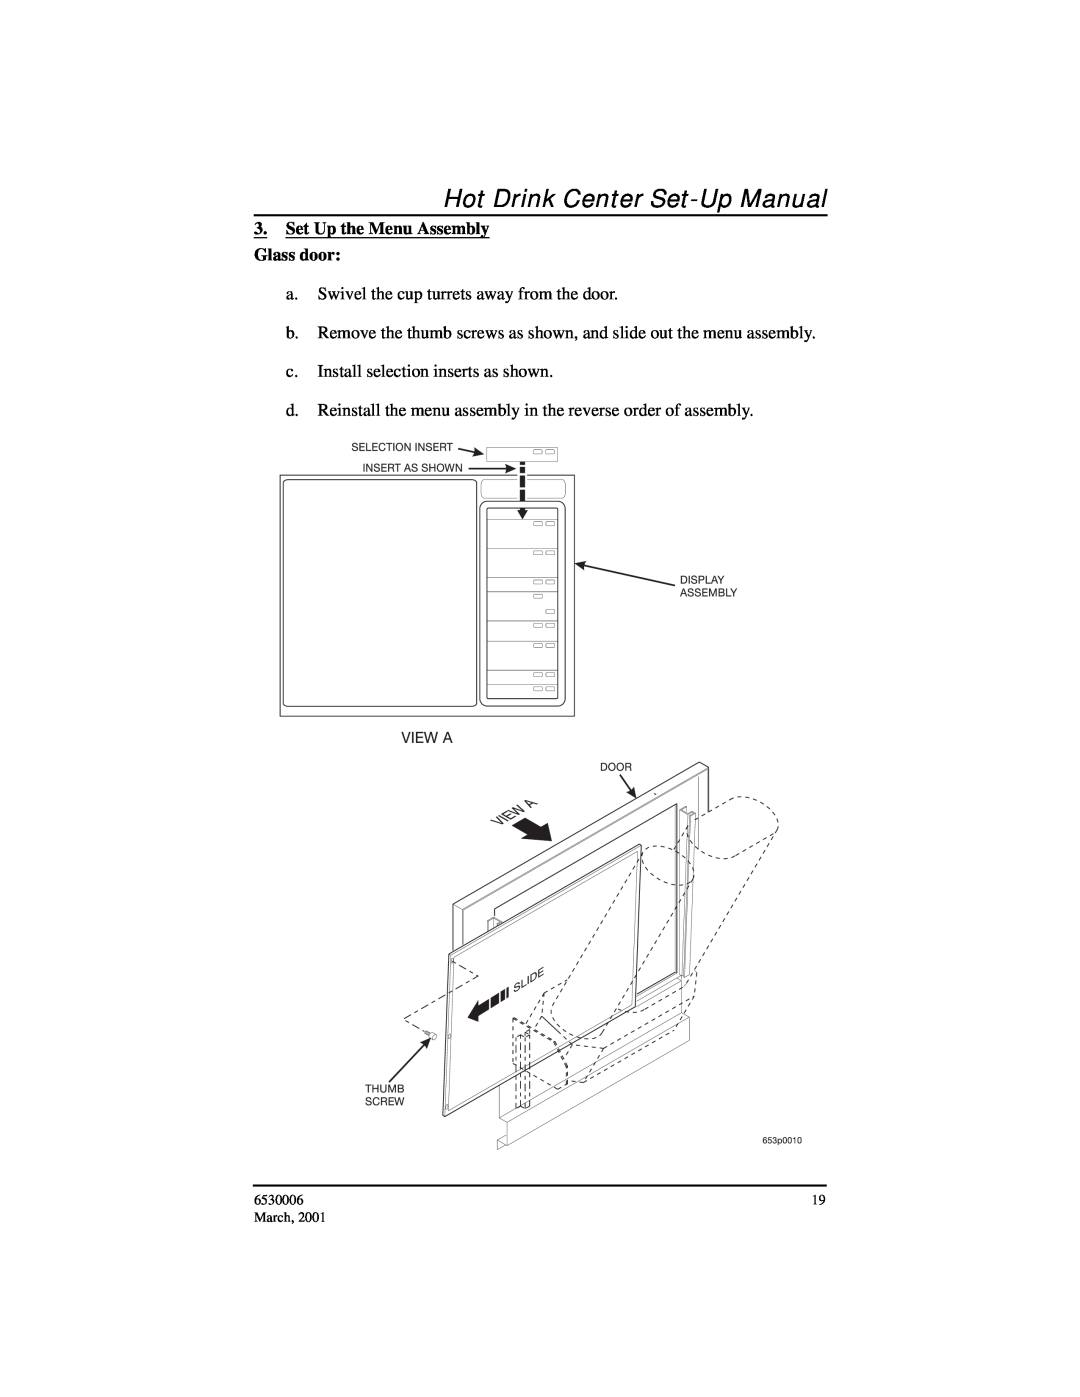 Crane Merchandising Systems 6530006 manual Hot Drink Center Set-Up Manual, Set Up the Menu Assembly Glass door, March 